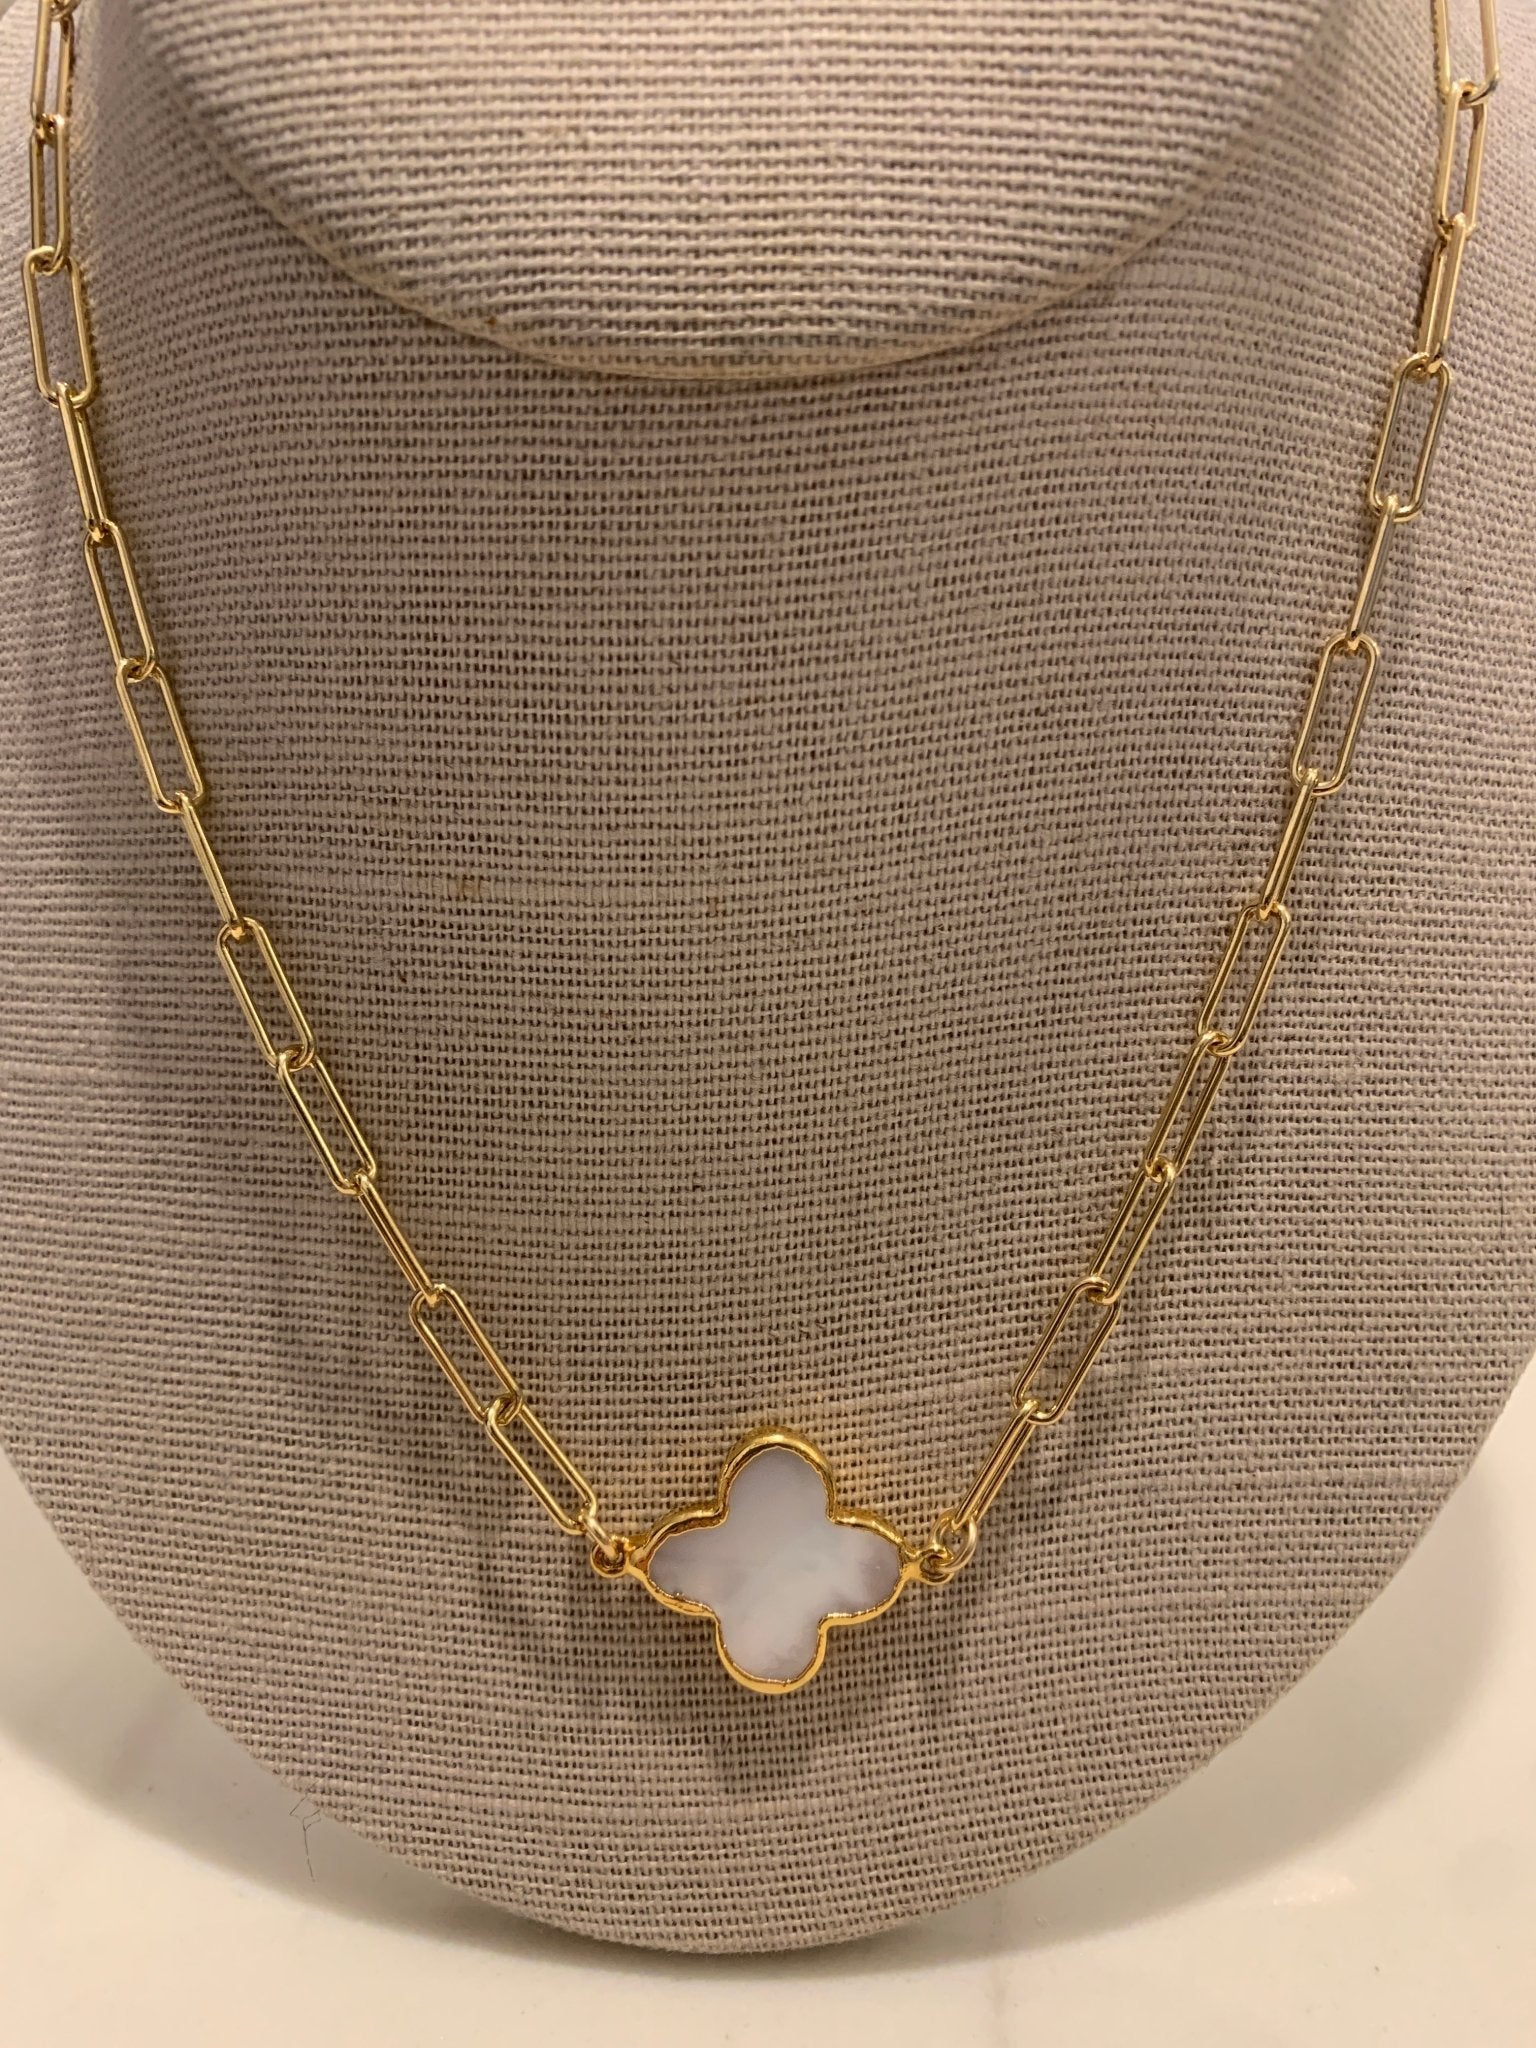 Paperclip Chain Mother of Pearl Clover Necklace, 16 Inches